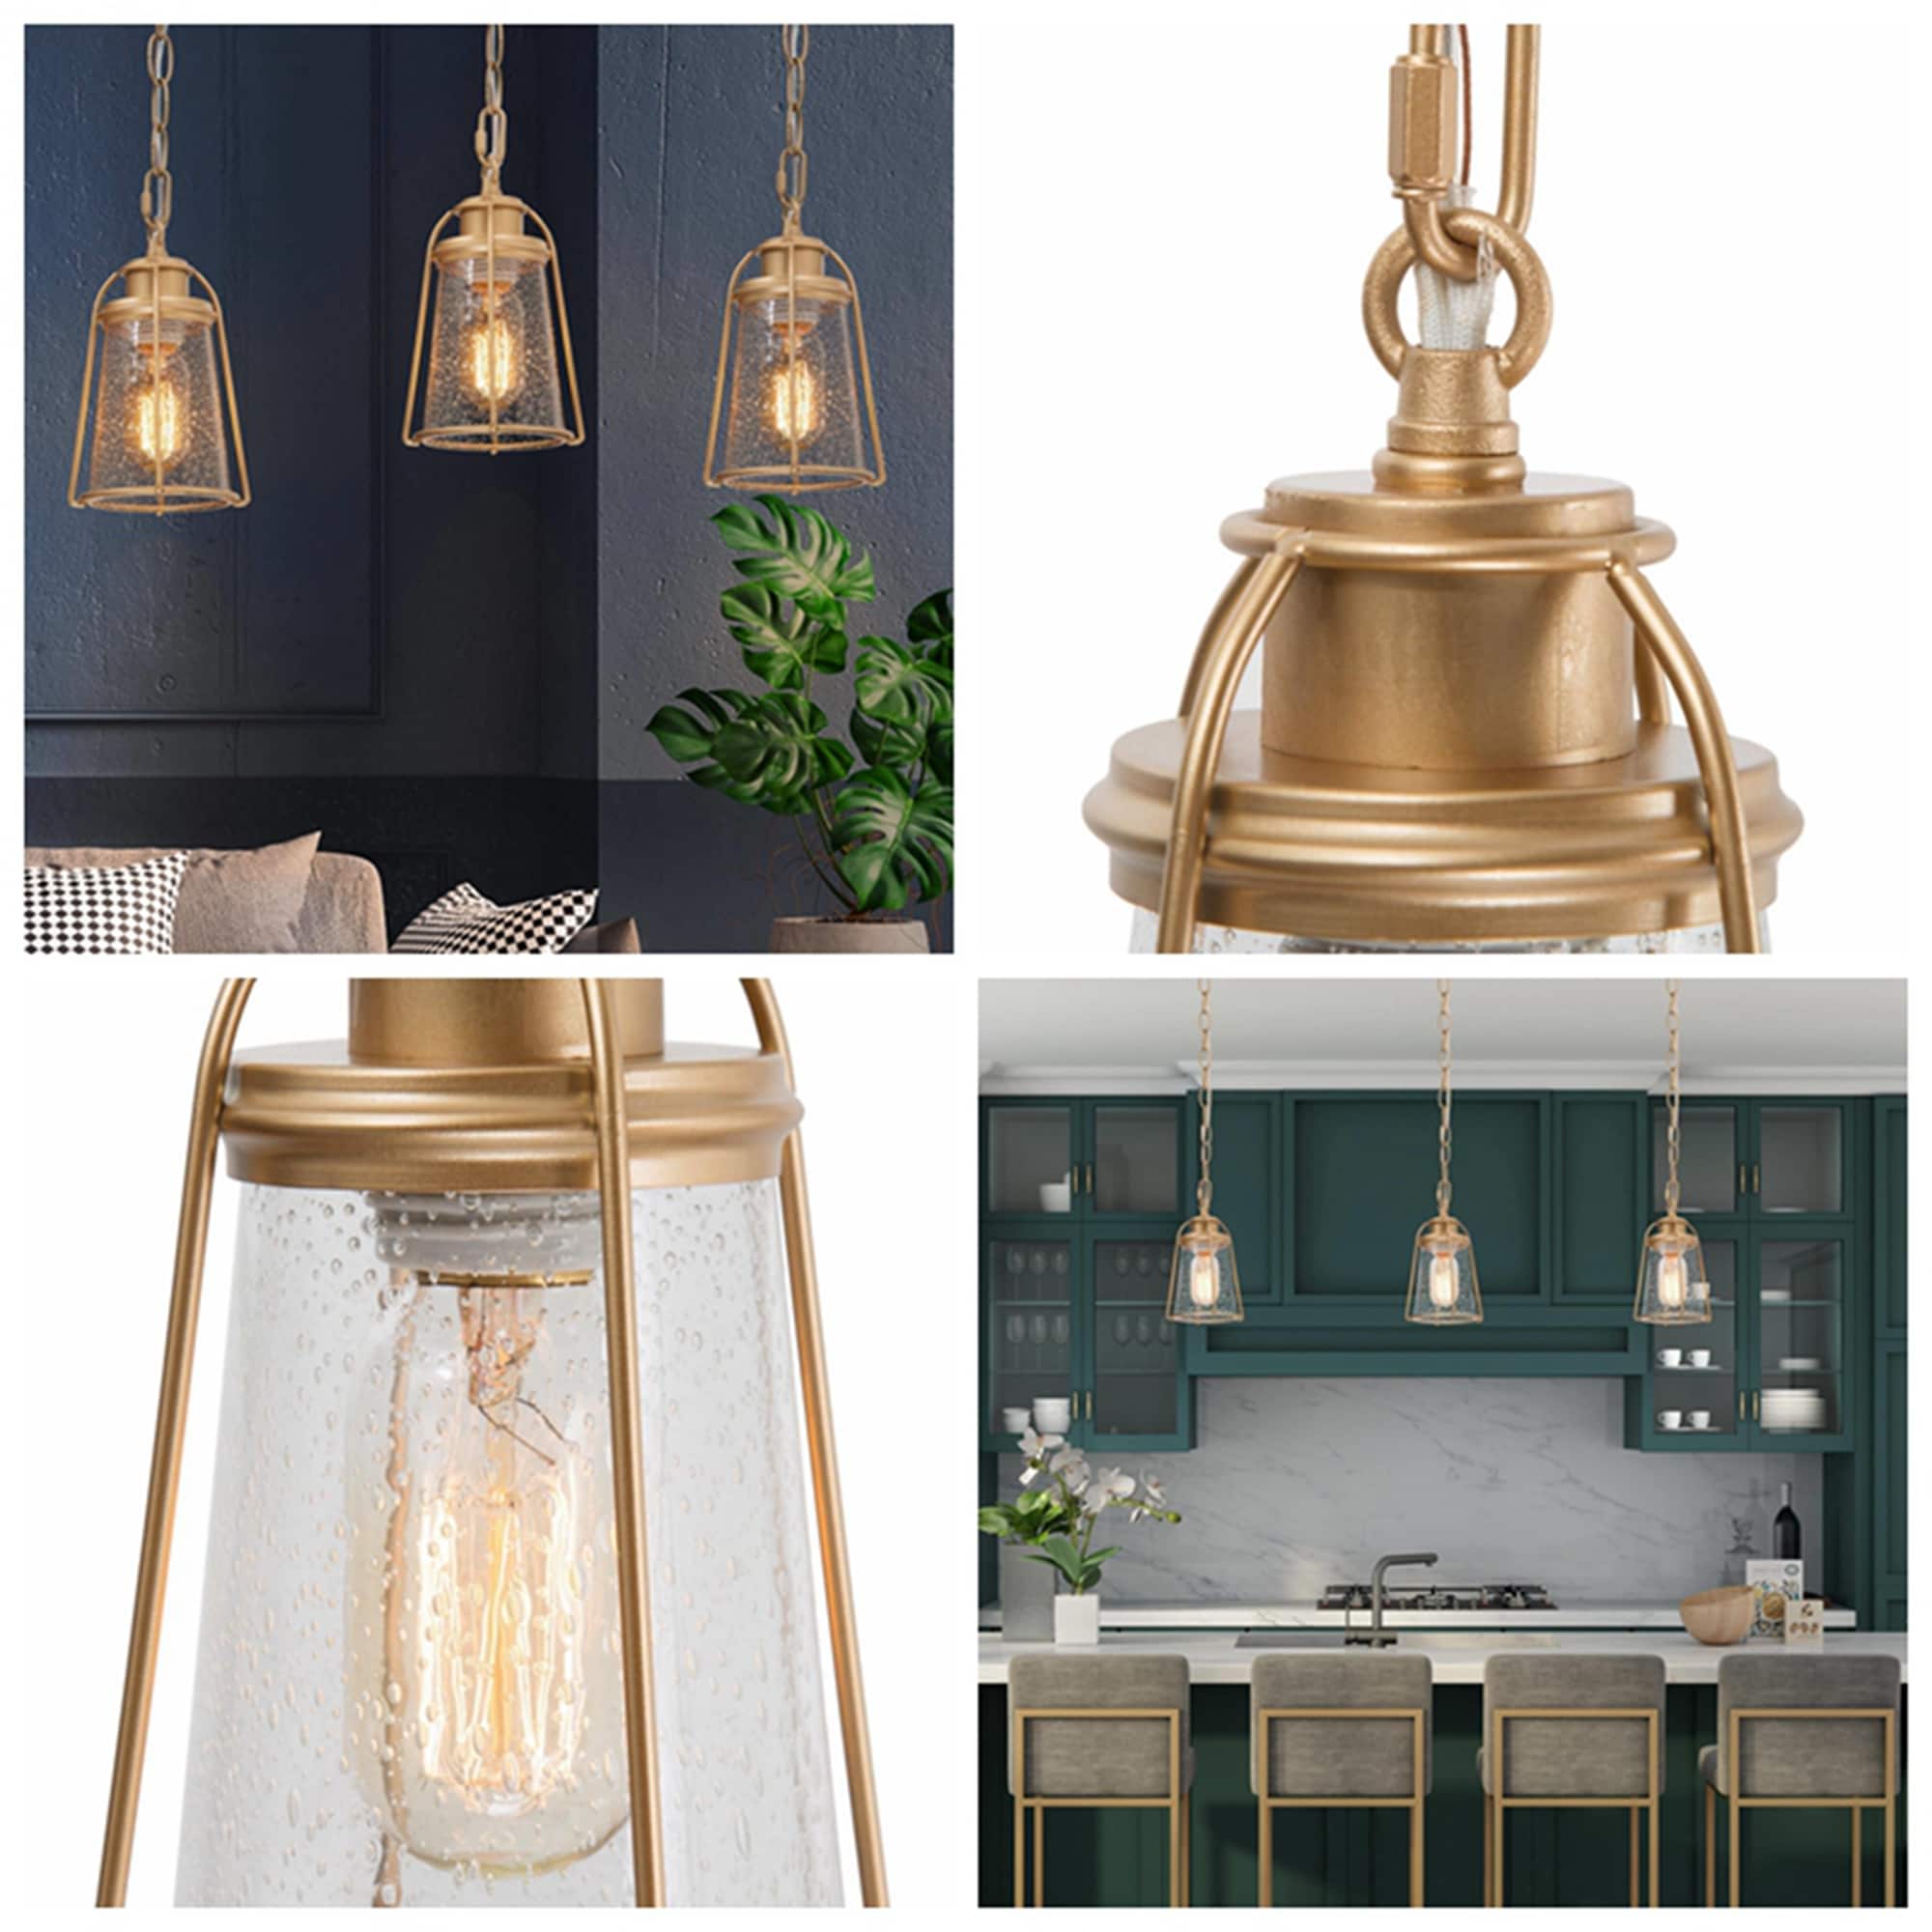 Uolfin Matte Gold the Light Mini department at Lantern Hanging Seeded LED Pendant Lighting Shade and Island Glass in Glass Kitchen Modern/Contemporary Seeded